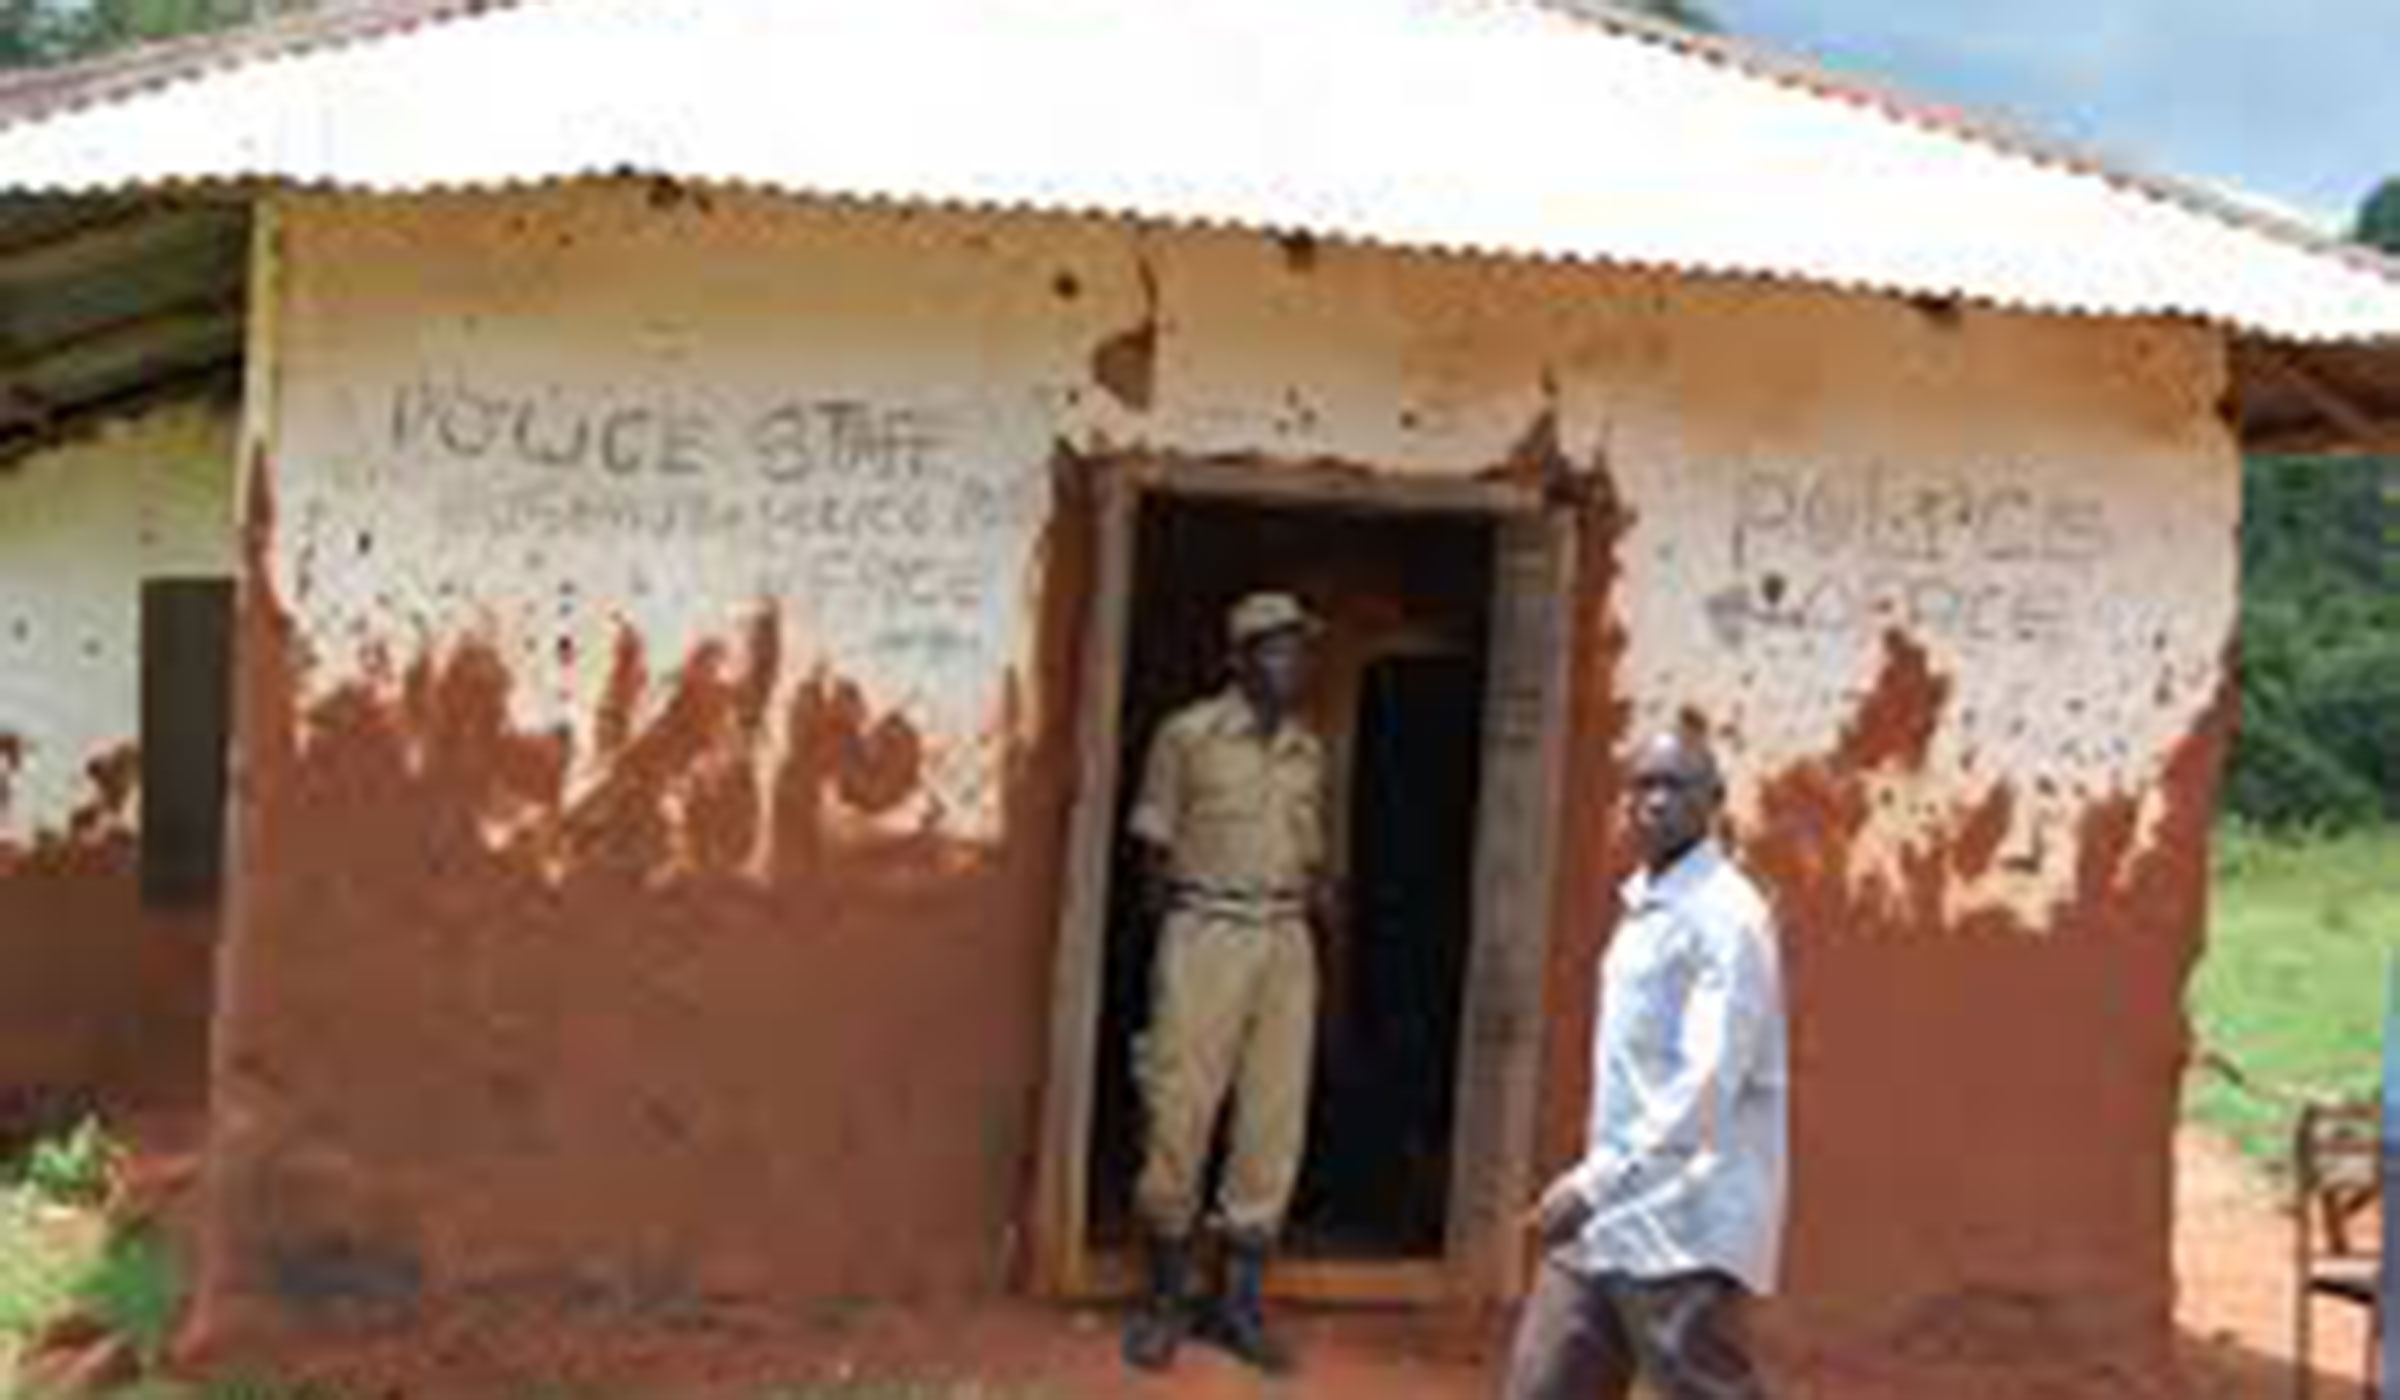 A police officer in dilapidated staff quarters in Uganda. Ugandan armed forces have for years called for decent accommodation. Internet photo